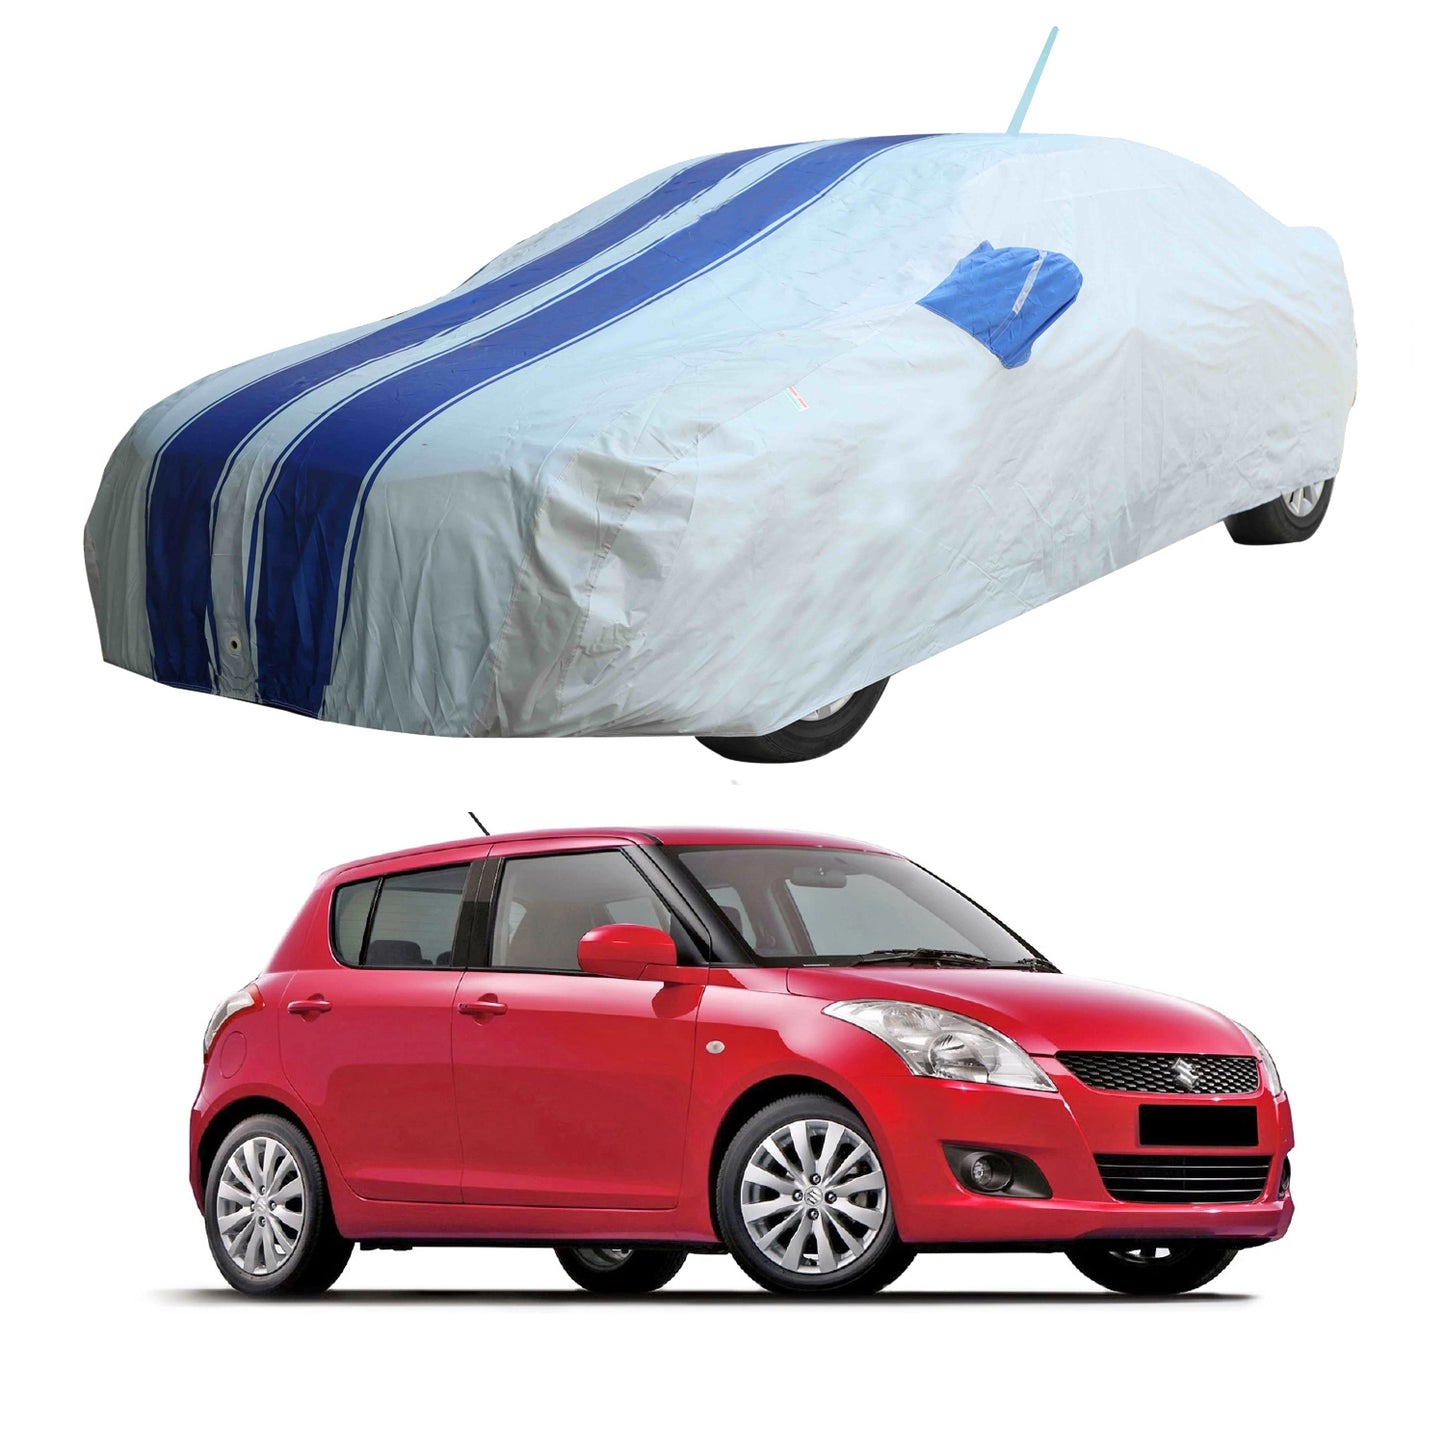 Oshotto 100% Blue dustproof and Water Resistant Car Body Cover with Mirror & Antenna Pockets For Maruti Suzuki Swift 2011-2023